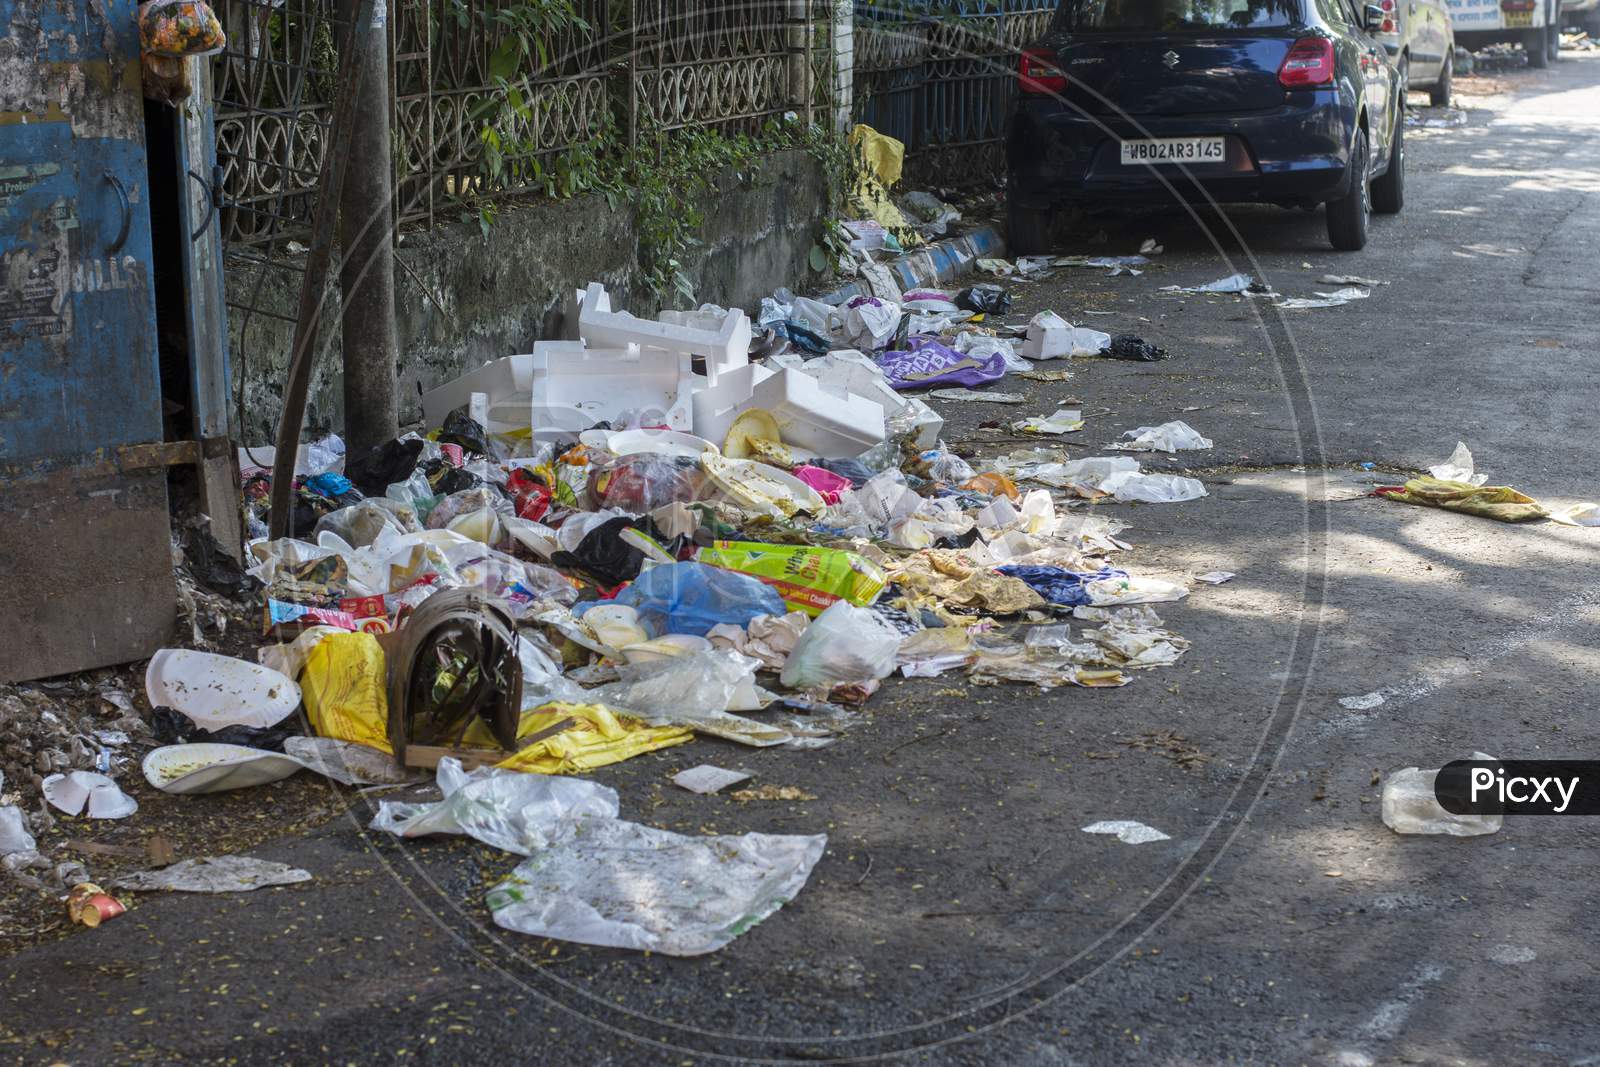 15Th October, 2021, Kolkata, West Bengal, India: Litter On Street Causing Pollution